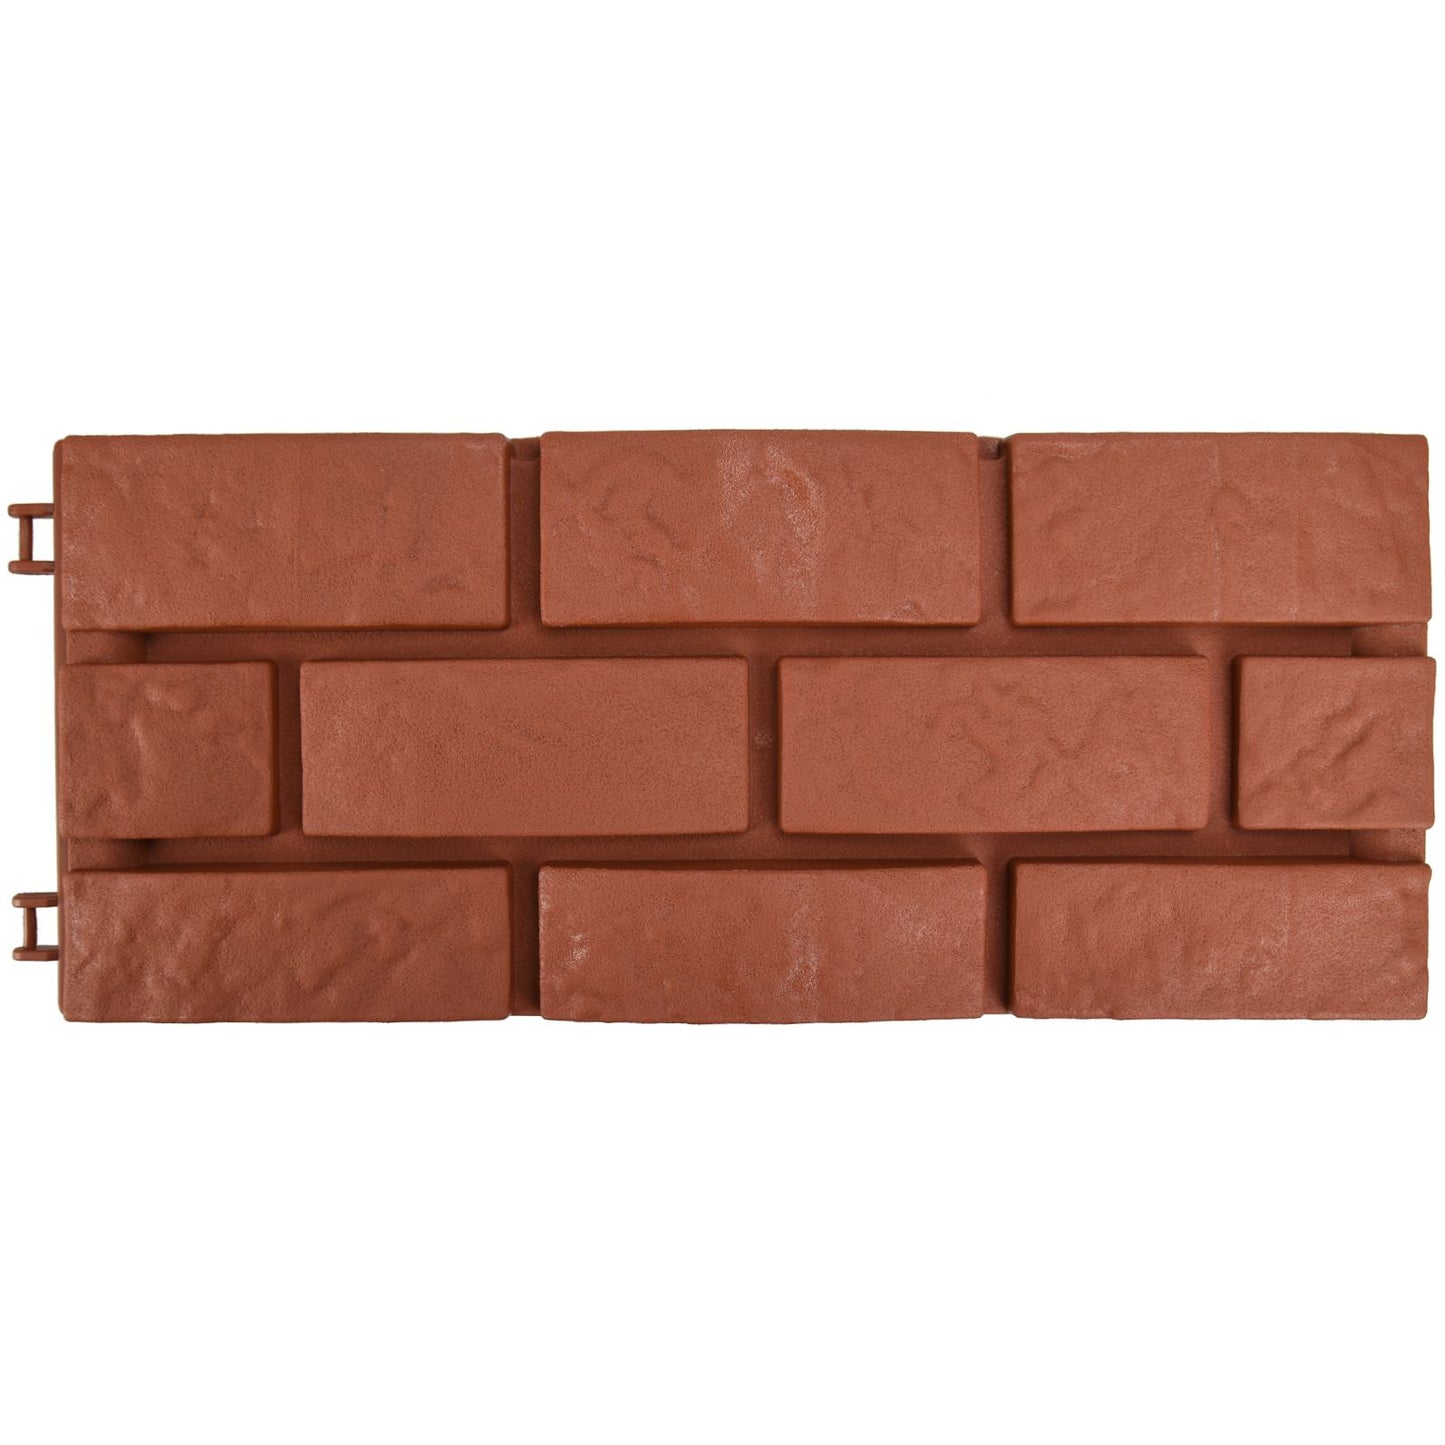 Set Of 4 Hammer-In Garden Edging Fences With Brick-Look Finish